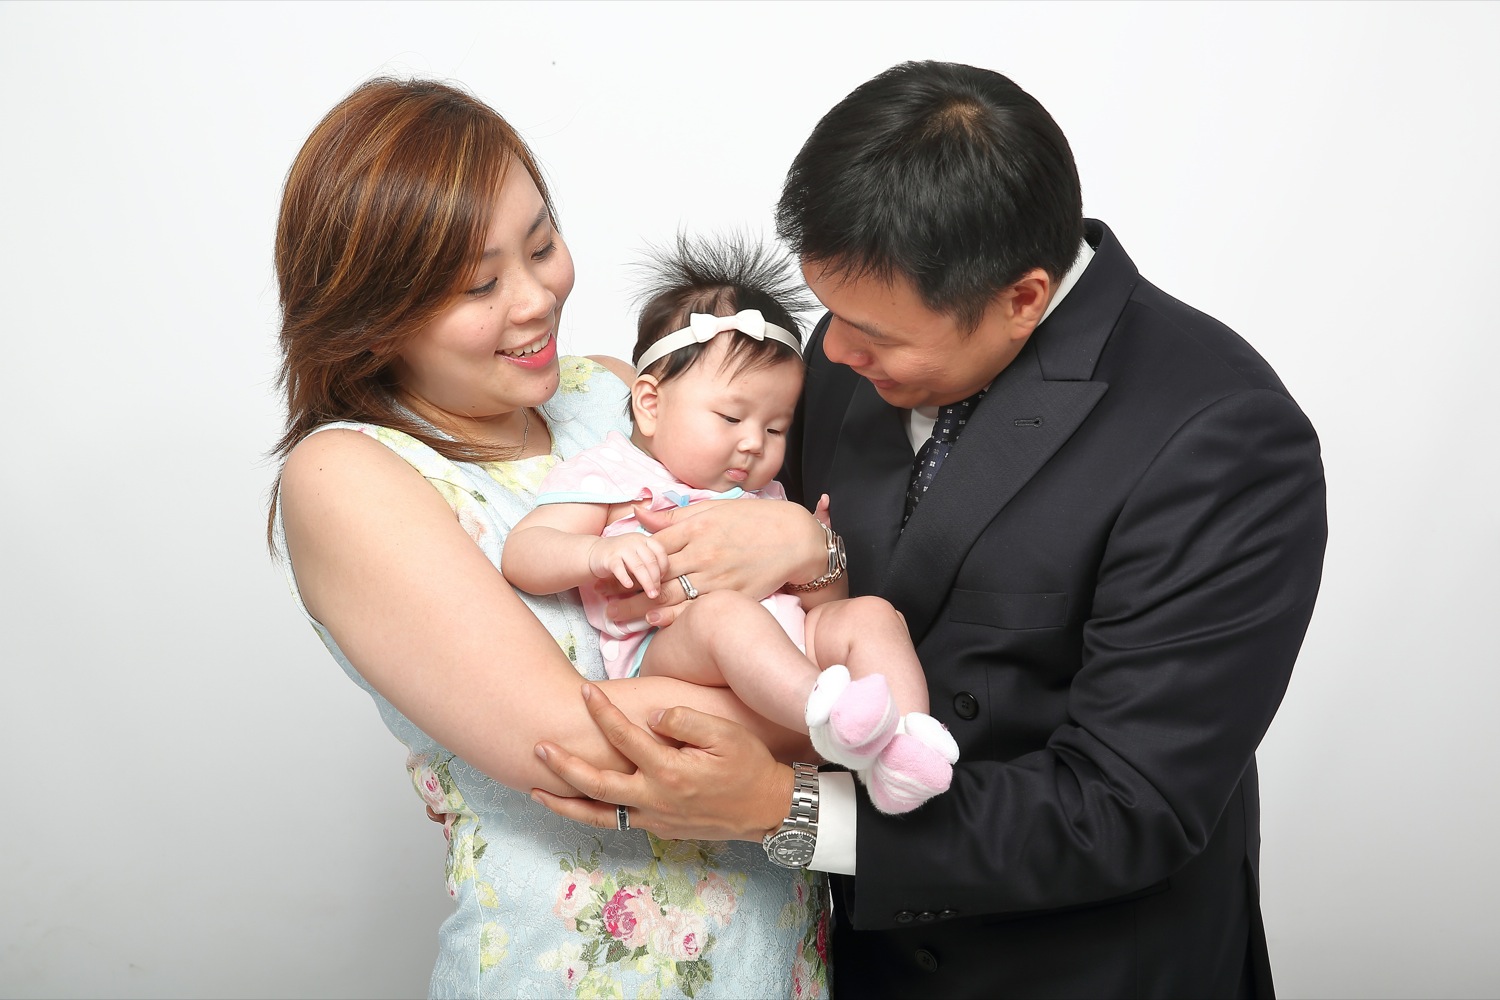 Jonathan's family photo shoot at Mudframes Pictures Studio